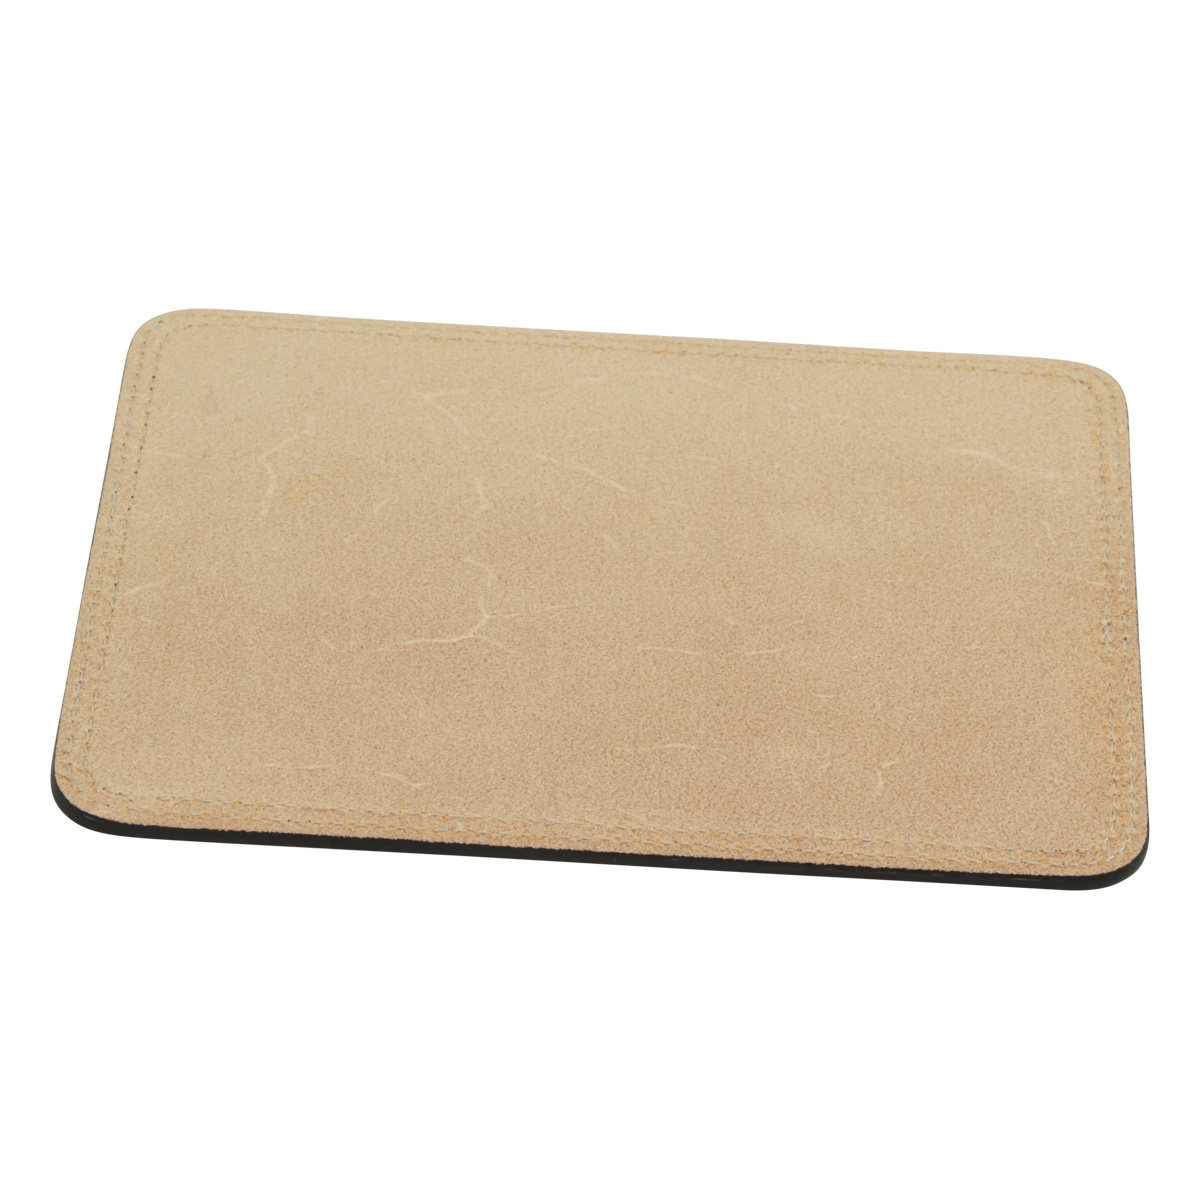 Leather mouse pad - green | 761089VE UK | Old Angler Firenze